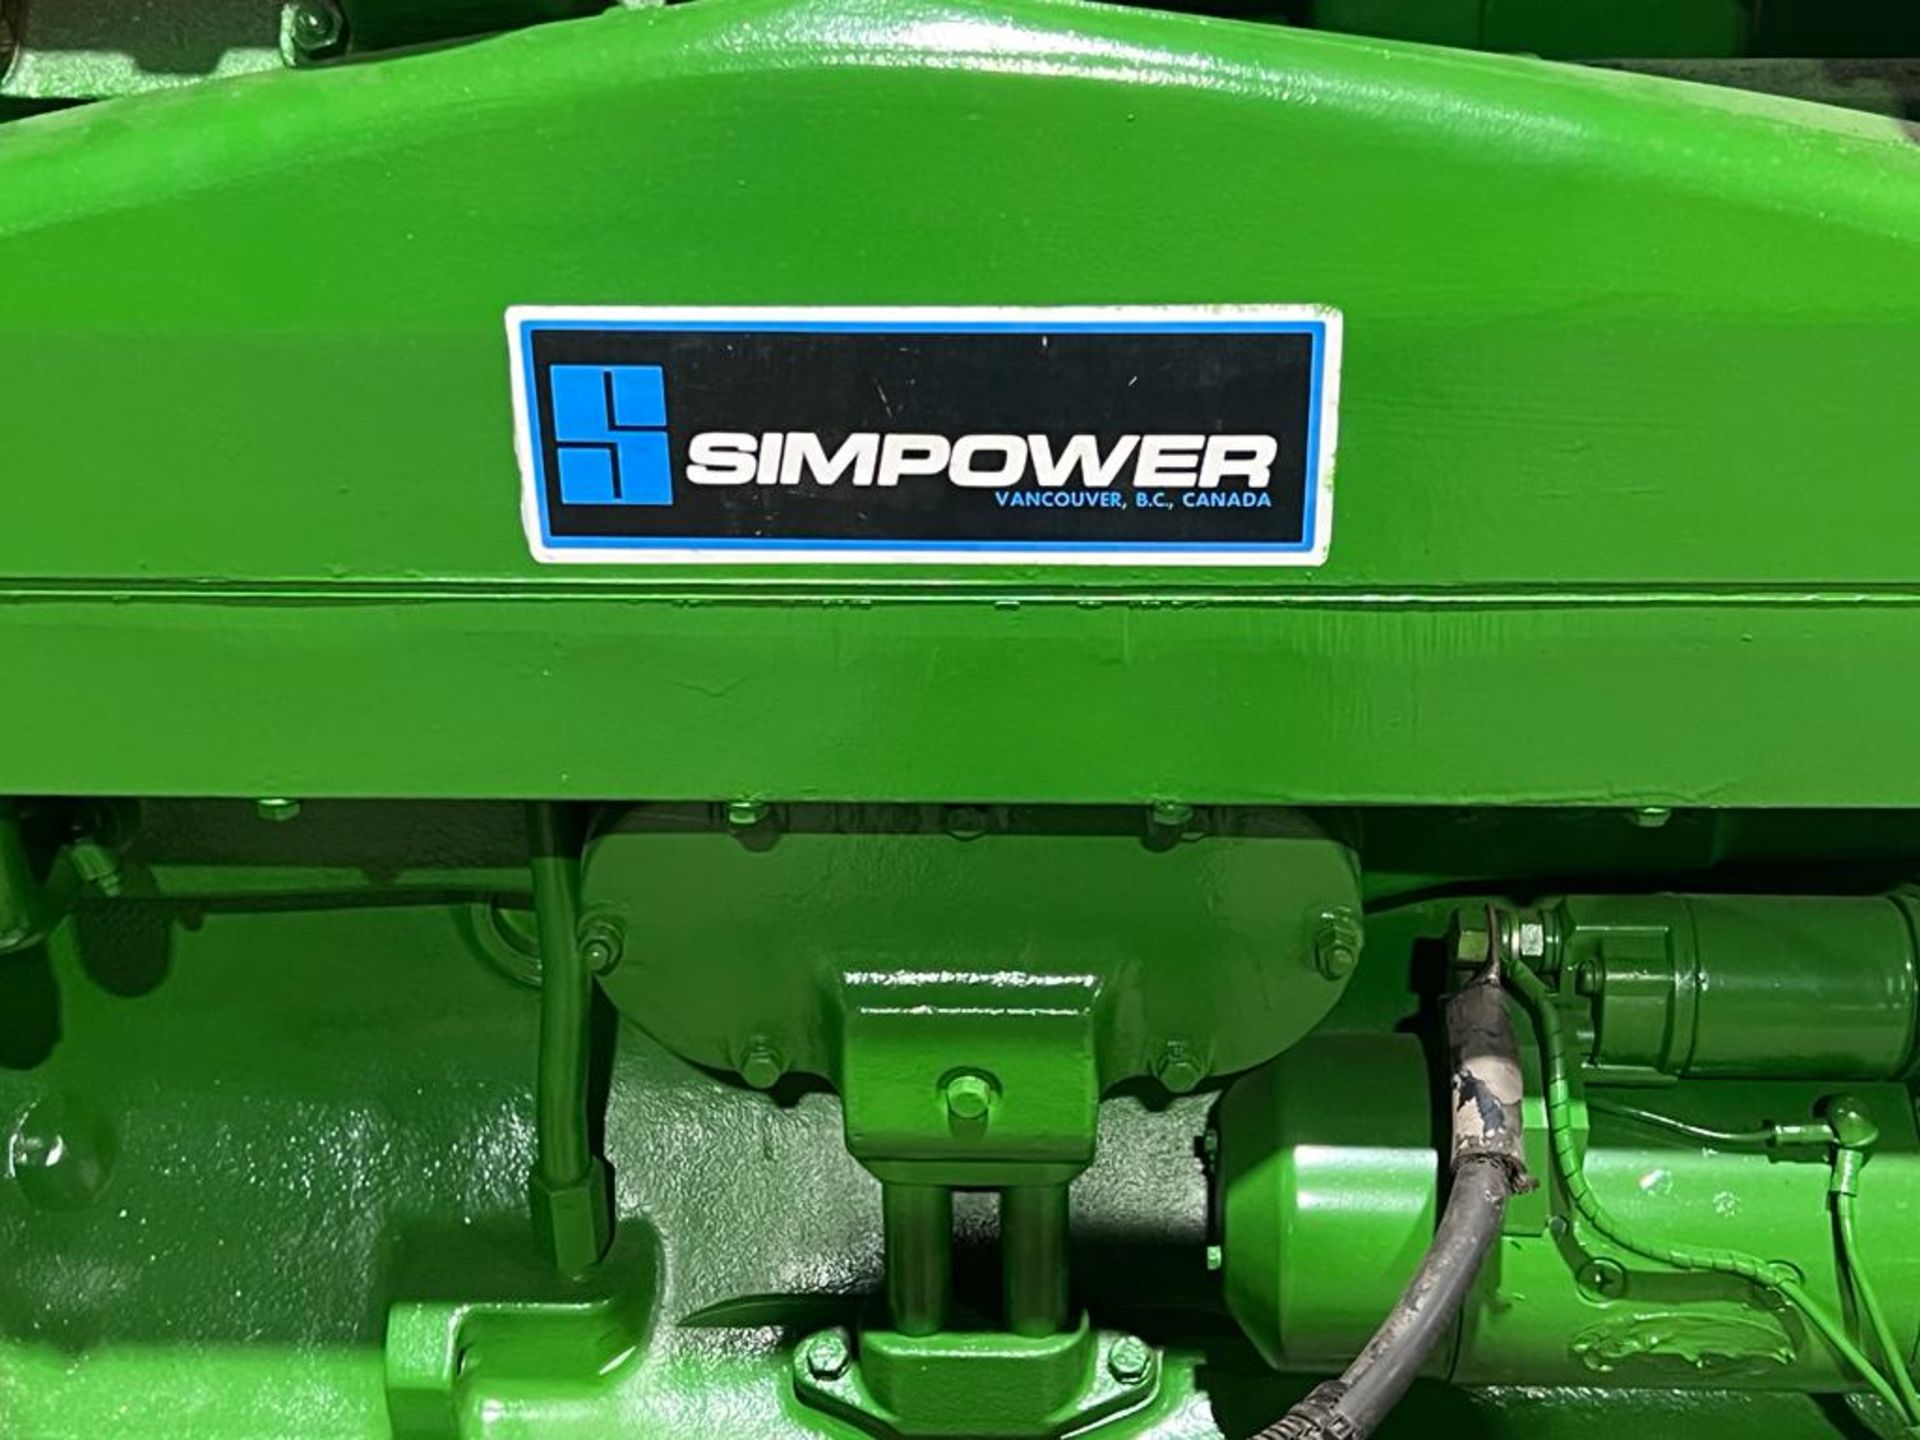 SimPower GENERATOR 125KVA 120 / 208V Unit with LOW HOURS - 100KW Unit NICE - Image 6 of 6